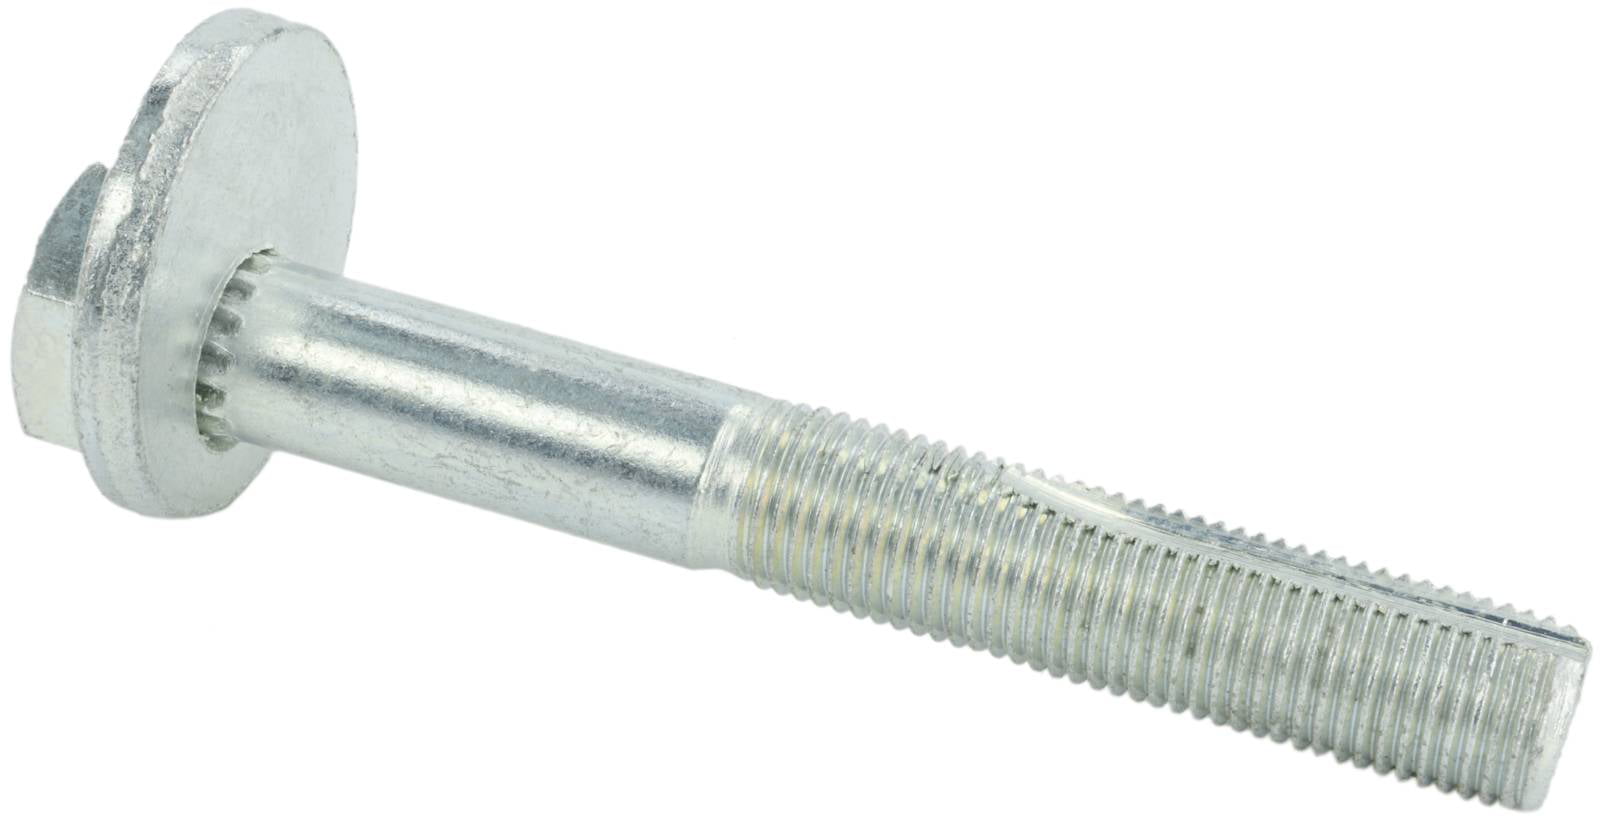 New Genuine FEBEST Camber Correction Screw 0529-001 Top German Quality